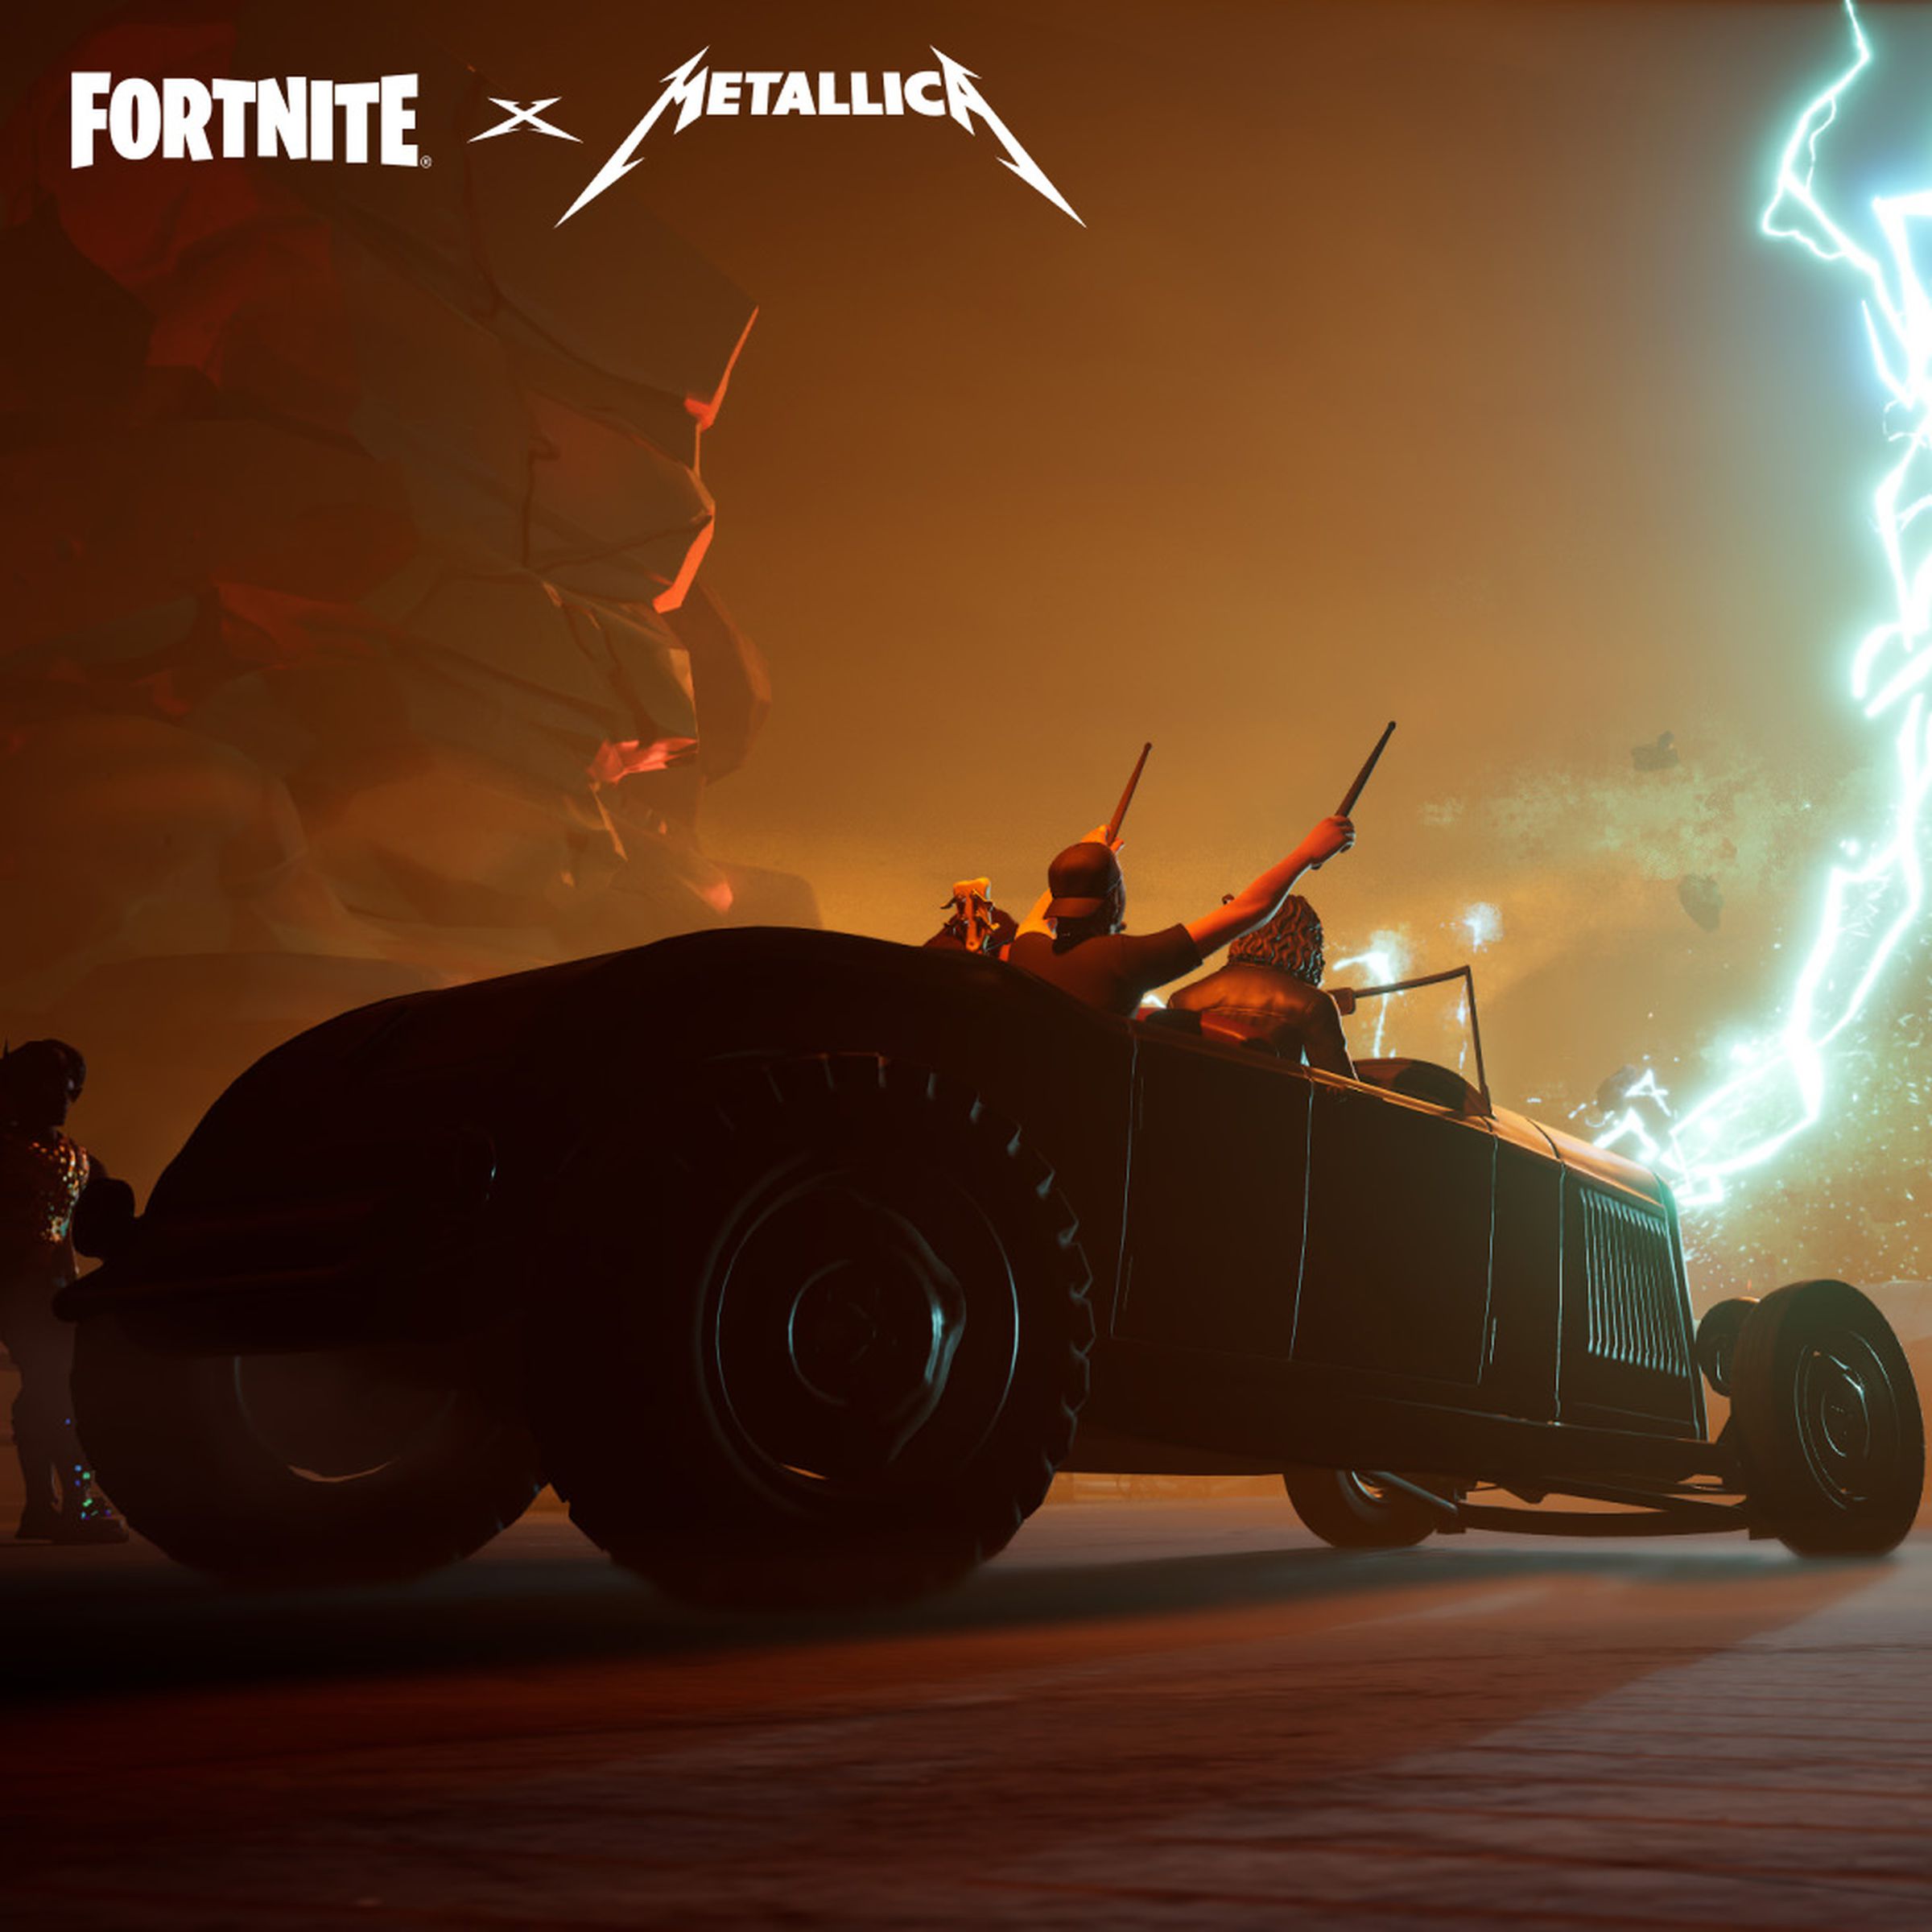 A screenshot from the video game Fortnite.